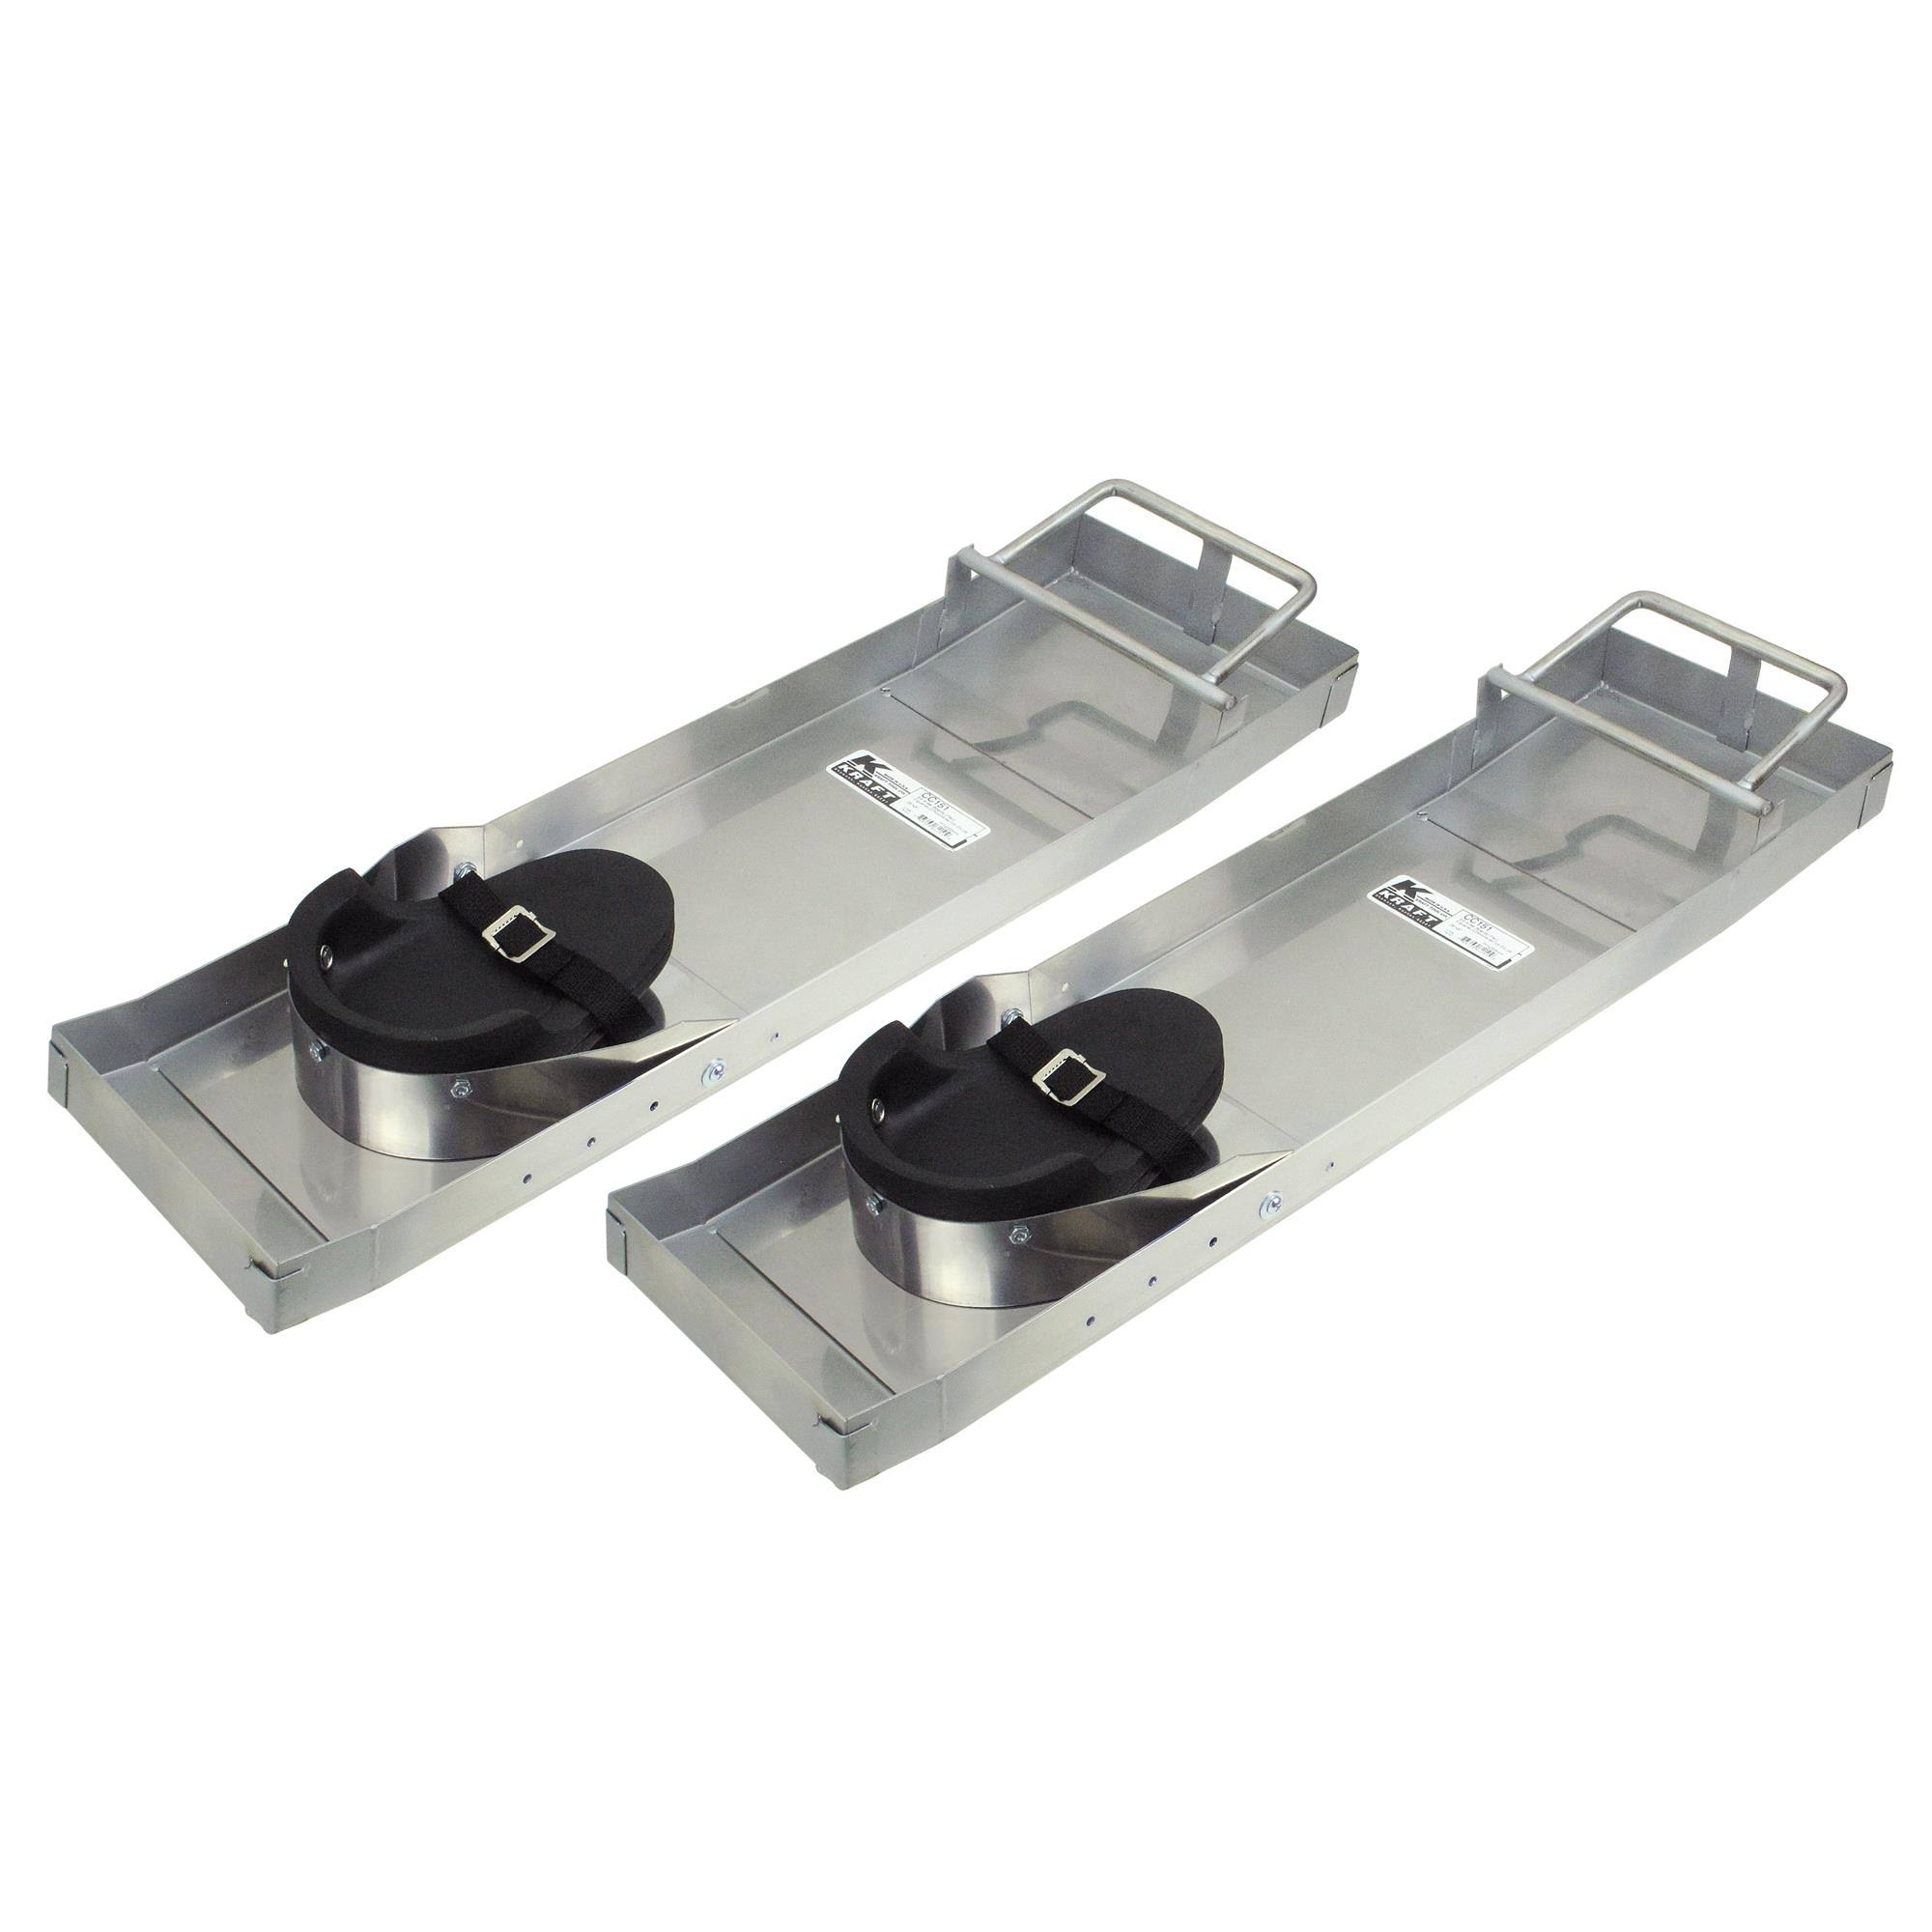 Kraft Tool Company CC151 28"x8" Deluxe Heavy-Duty Stainless Steel Knee Boards, Pair